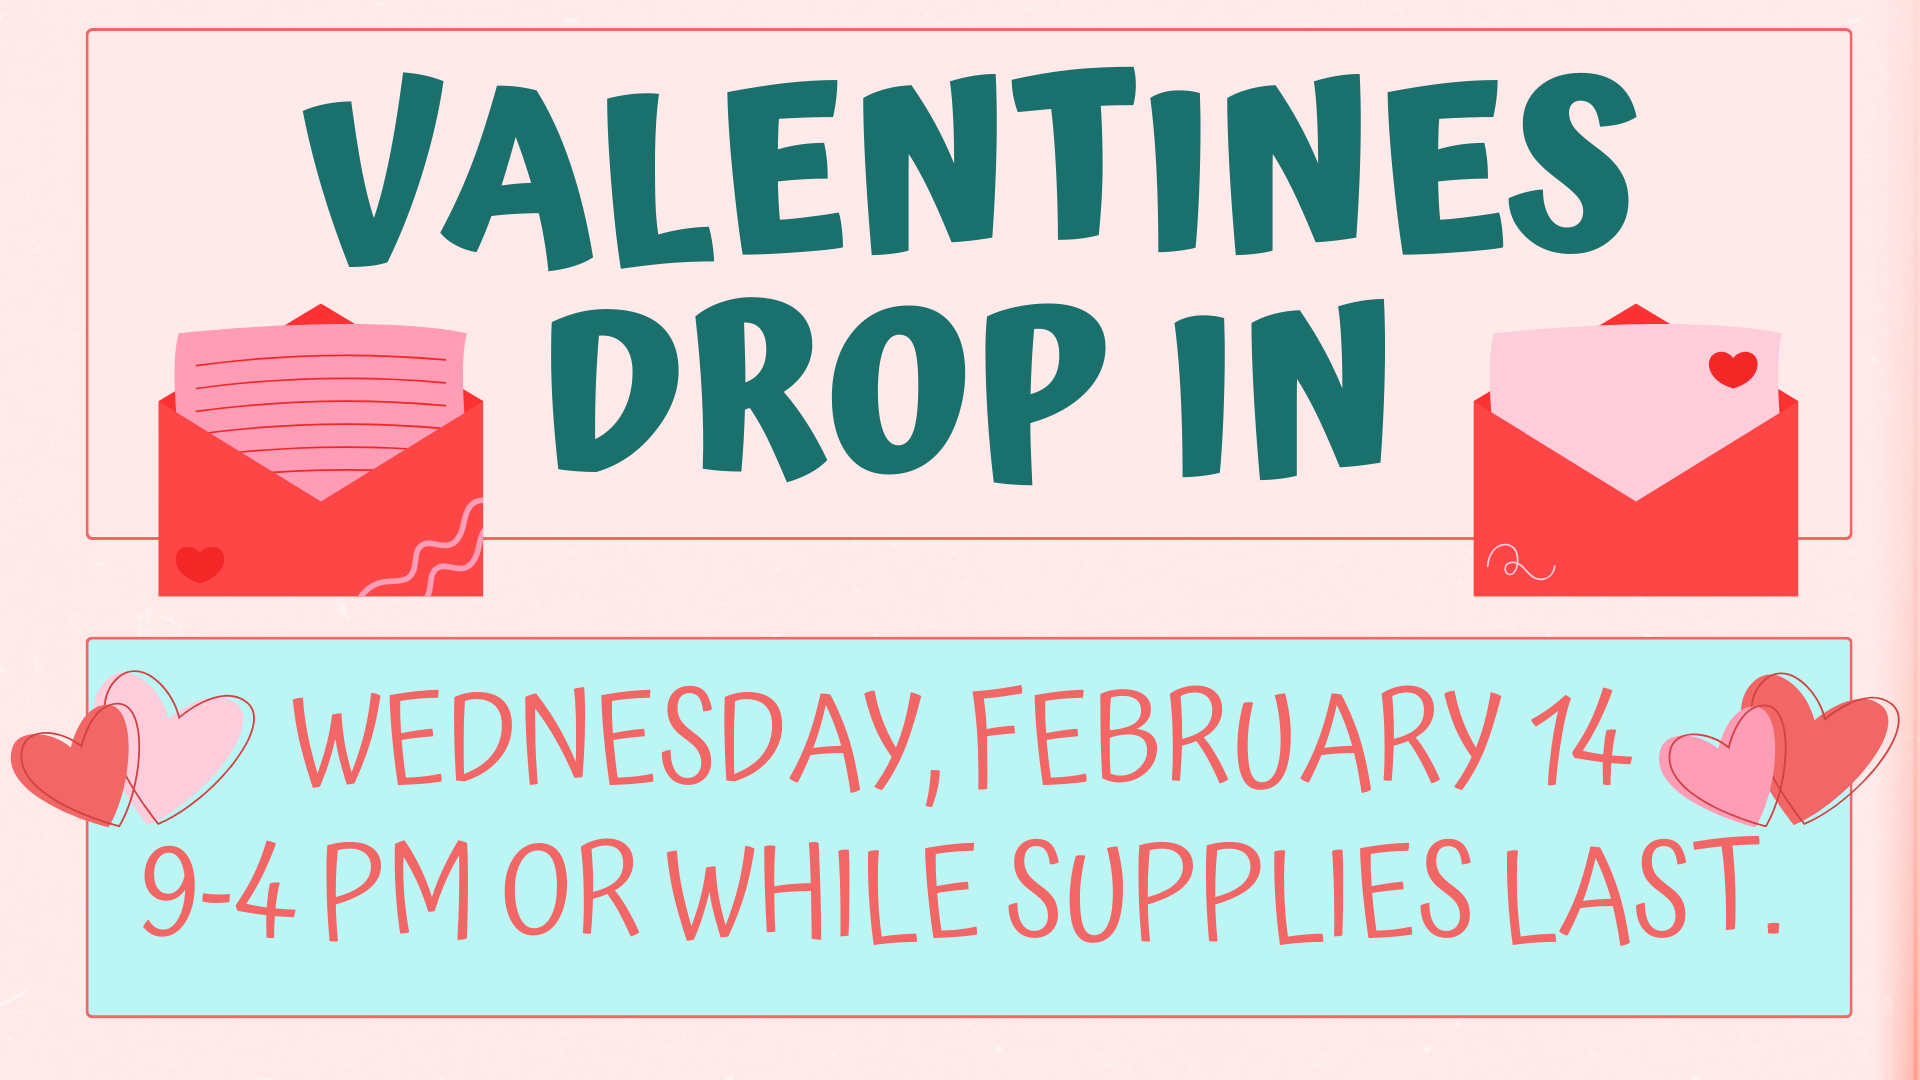 Valentines Drop In Wednesday, February 14 9-4 PM or while supplies last.